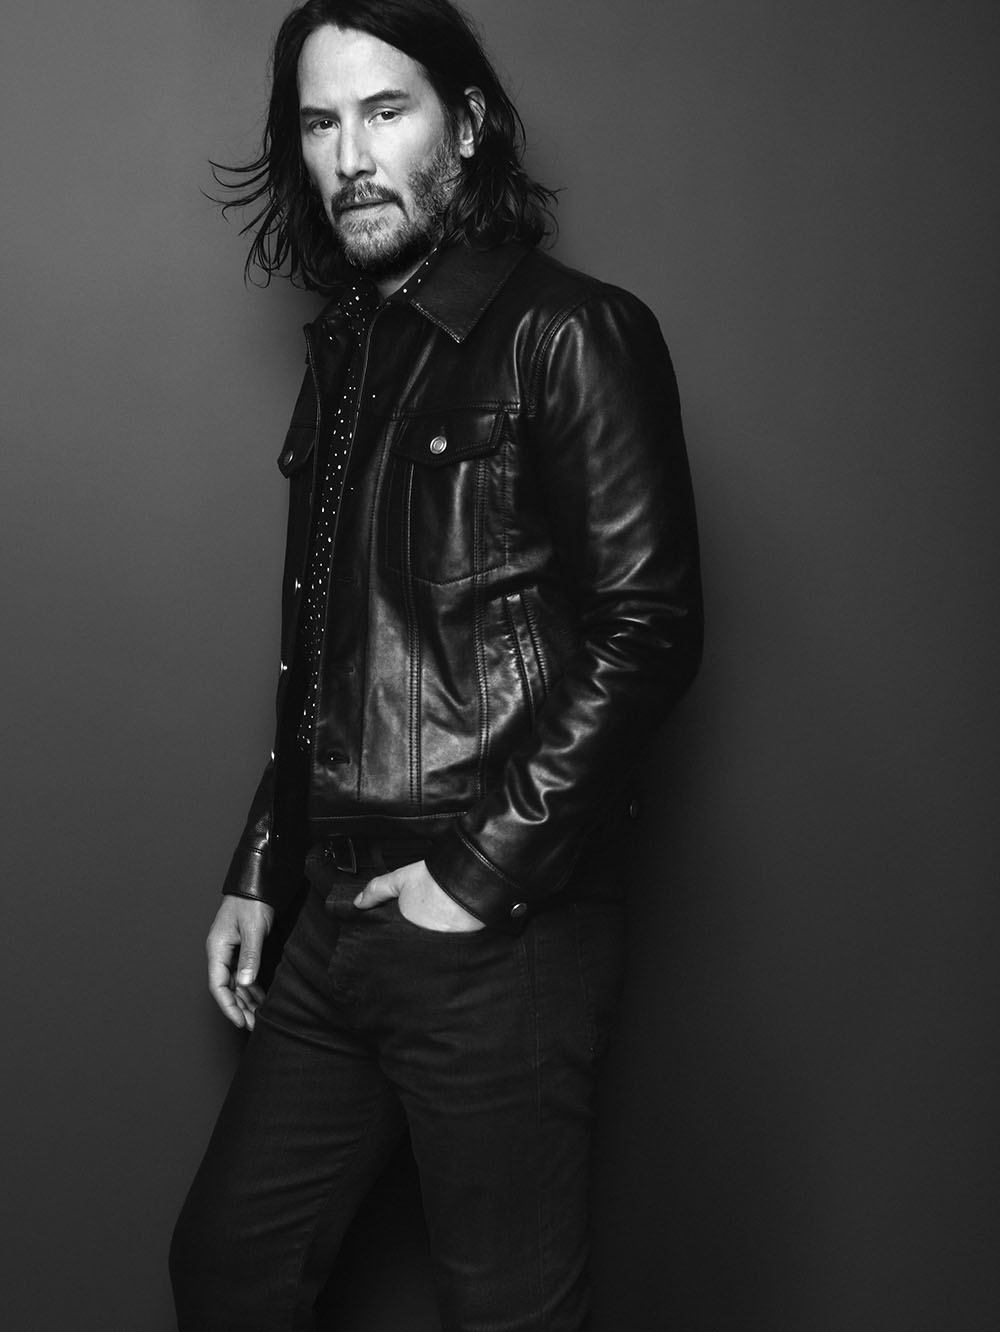 Saint Laurent Men’s Fall Winter 2019 Campaign with Keanu Reeves